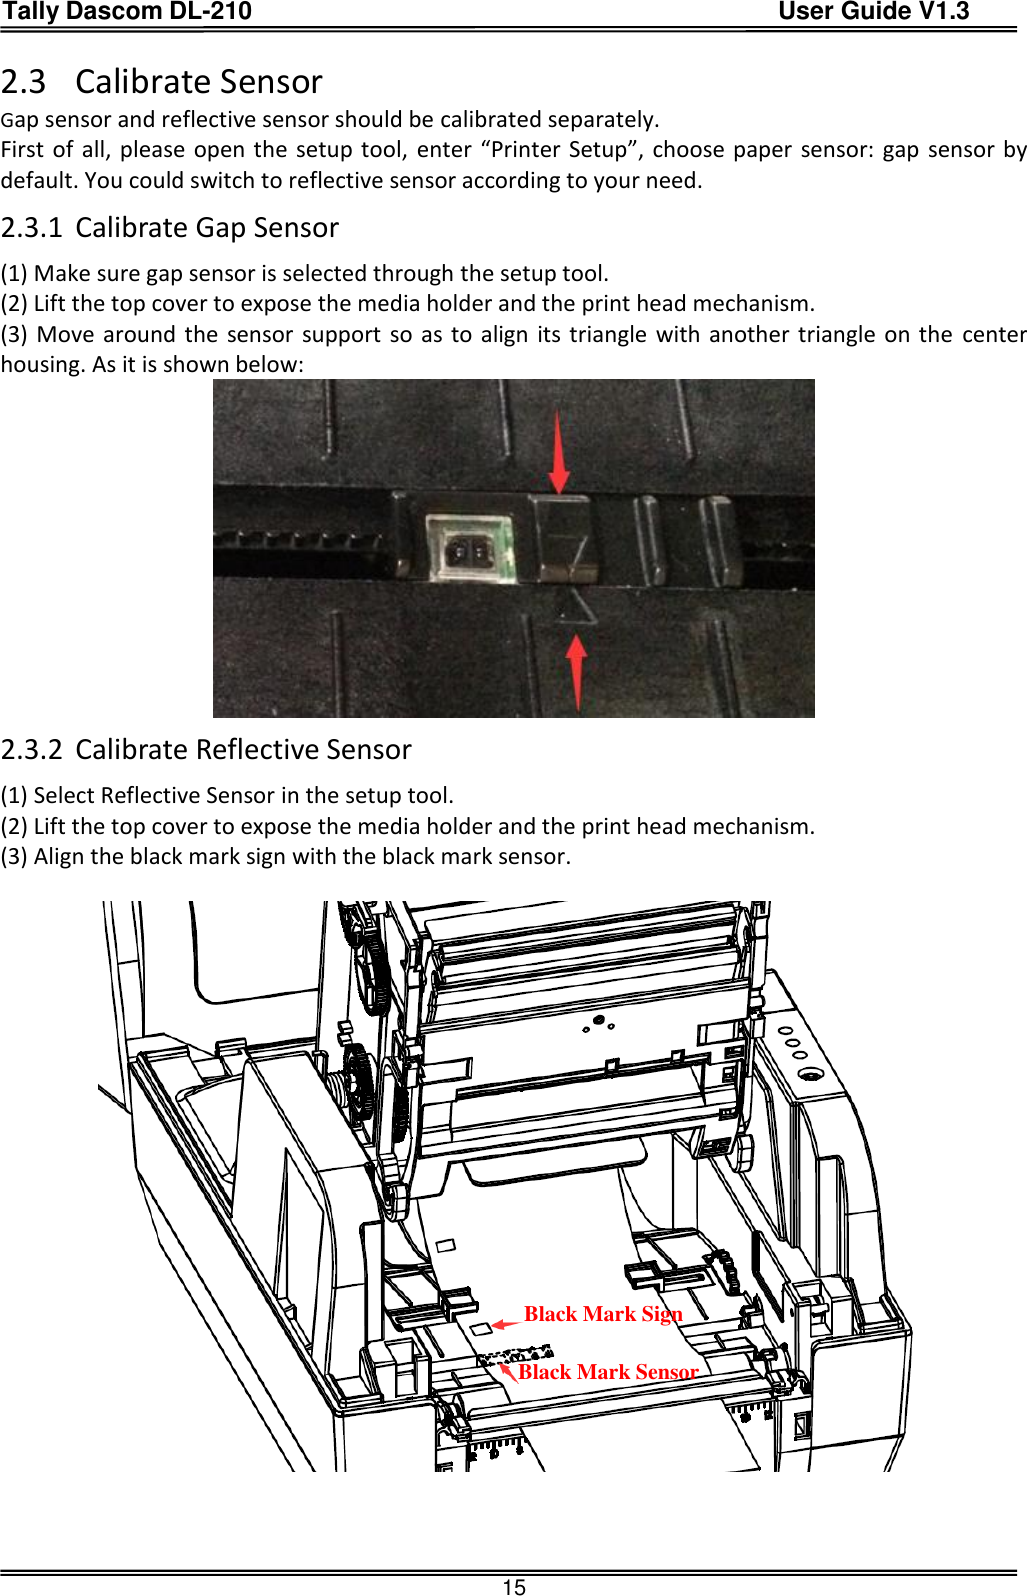 Tally Dascom DL-210                                          User Guide V1.3  15 2.3 Calibrate Sensor Gap sensor and reflective sensor should be calibrated separately.   First of all, please open the setup tool,  enter “Printer Setup”, choose paper sensor: gap sensor by default. You could switch to reflective sensor according to your need. 2.3.1 Calibrate Gap Sensor   (1) Make sure gap sensor is selected through the setup tool. (2) Lift the top cover to expose the media holder and the print head mechanism. (3) Move around the sensor support so as to align its triangle with another triangle on the  center housing. As it is shown below:  2.3.2 Calibrate Reflective Sensor (1) Select Reflective Sensor in the setup tool. (2) Lift the top cover to expose the media holder and the print head mechanism. (3) Align the black mark sign with the black mark sensor.      Black Mark Sign Black Mark Sensor 